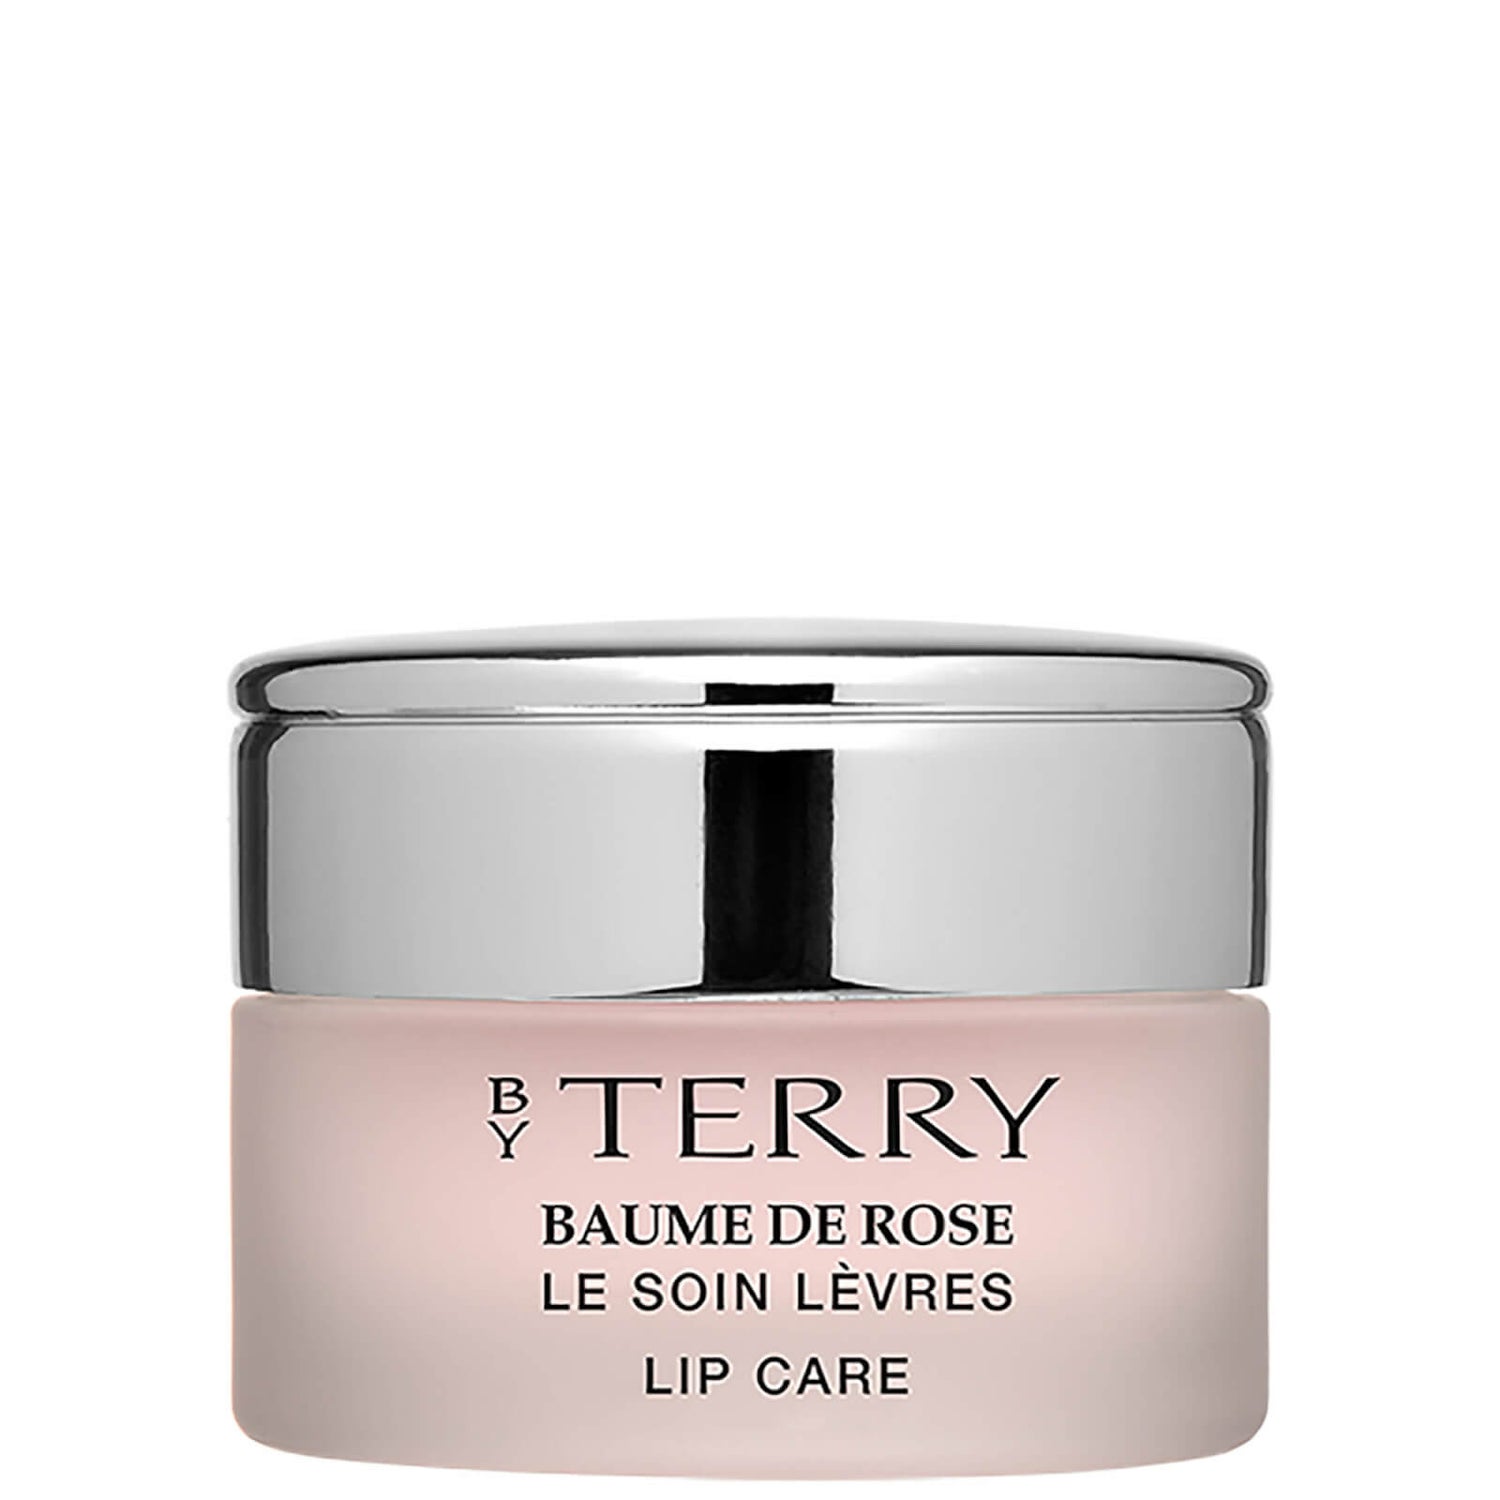 By Terry Baume de Rose 10g